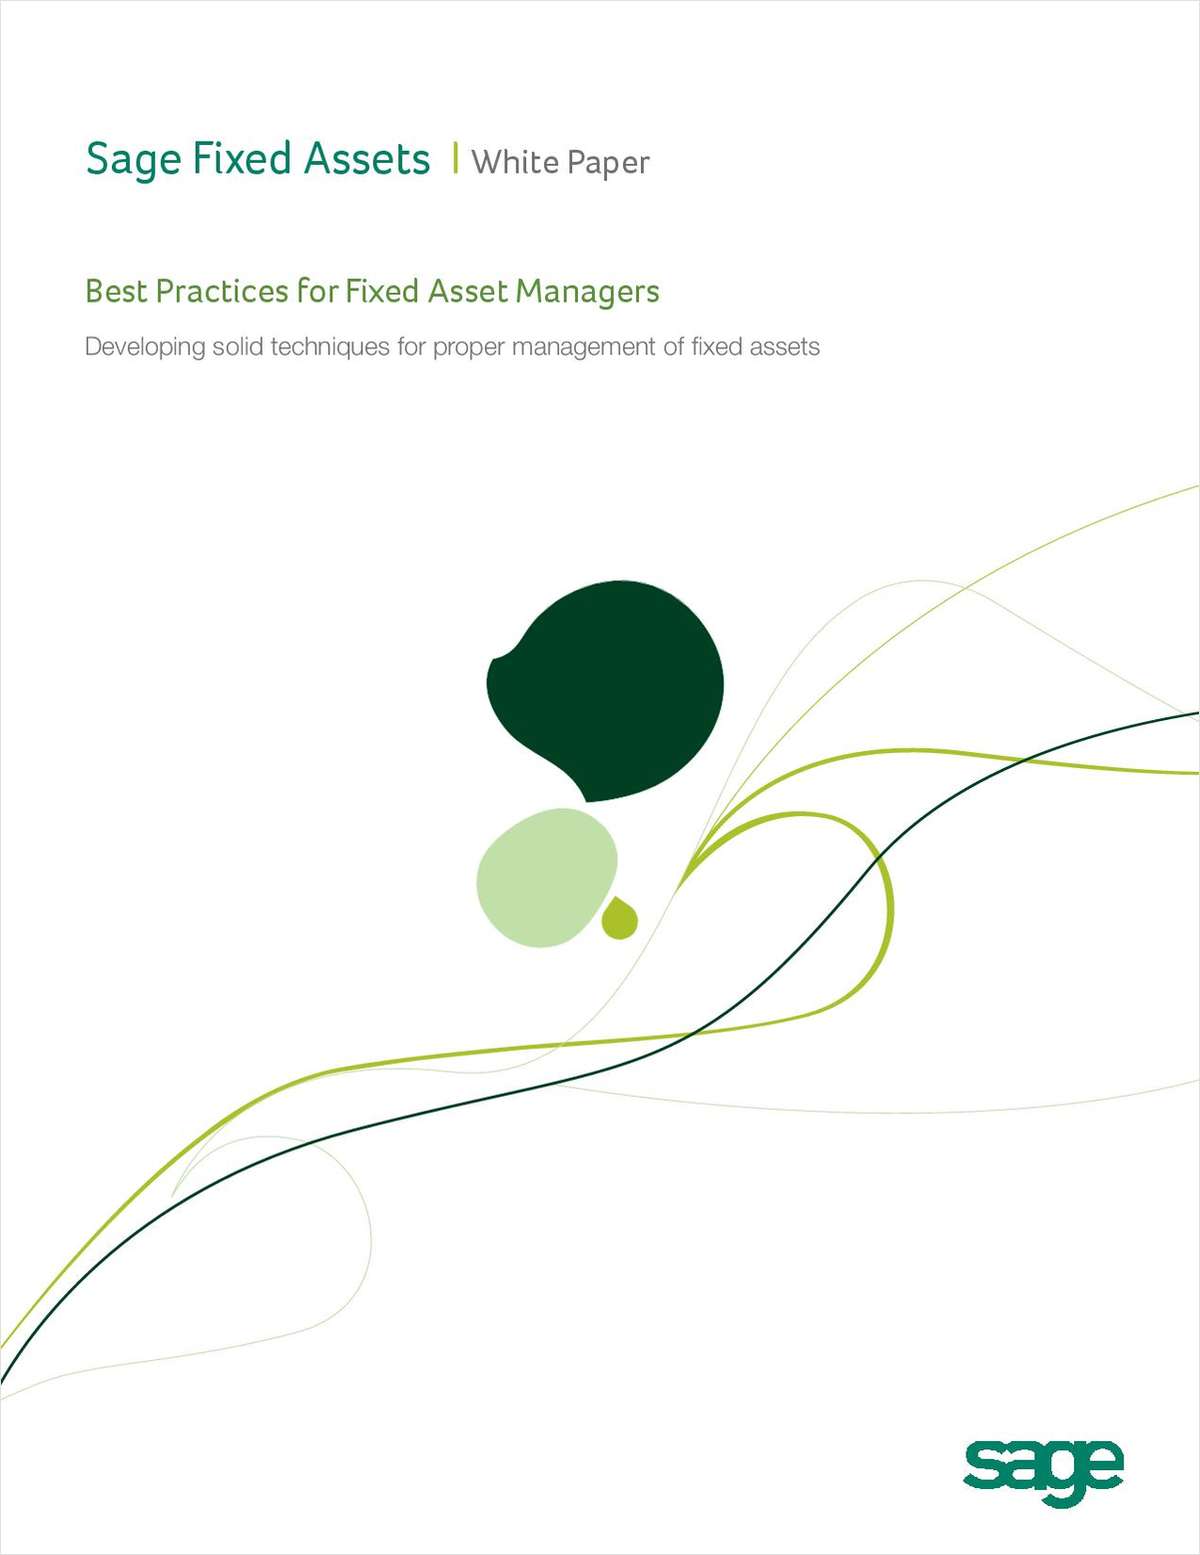 Best Practices for Fixed Asset Managers